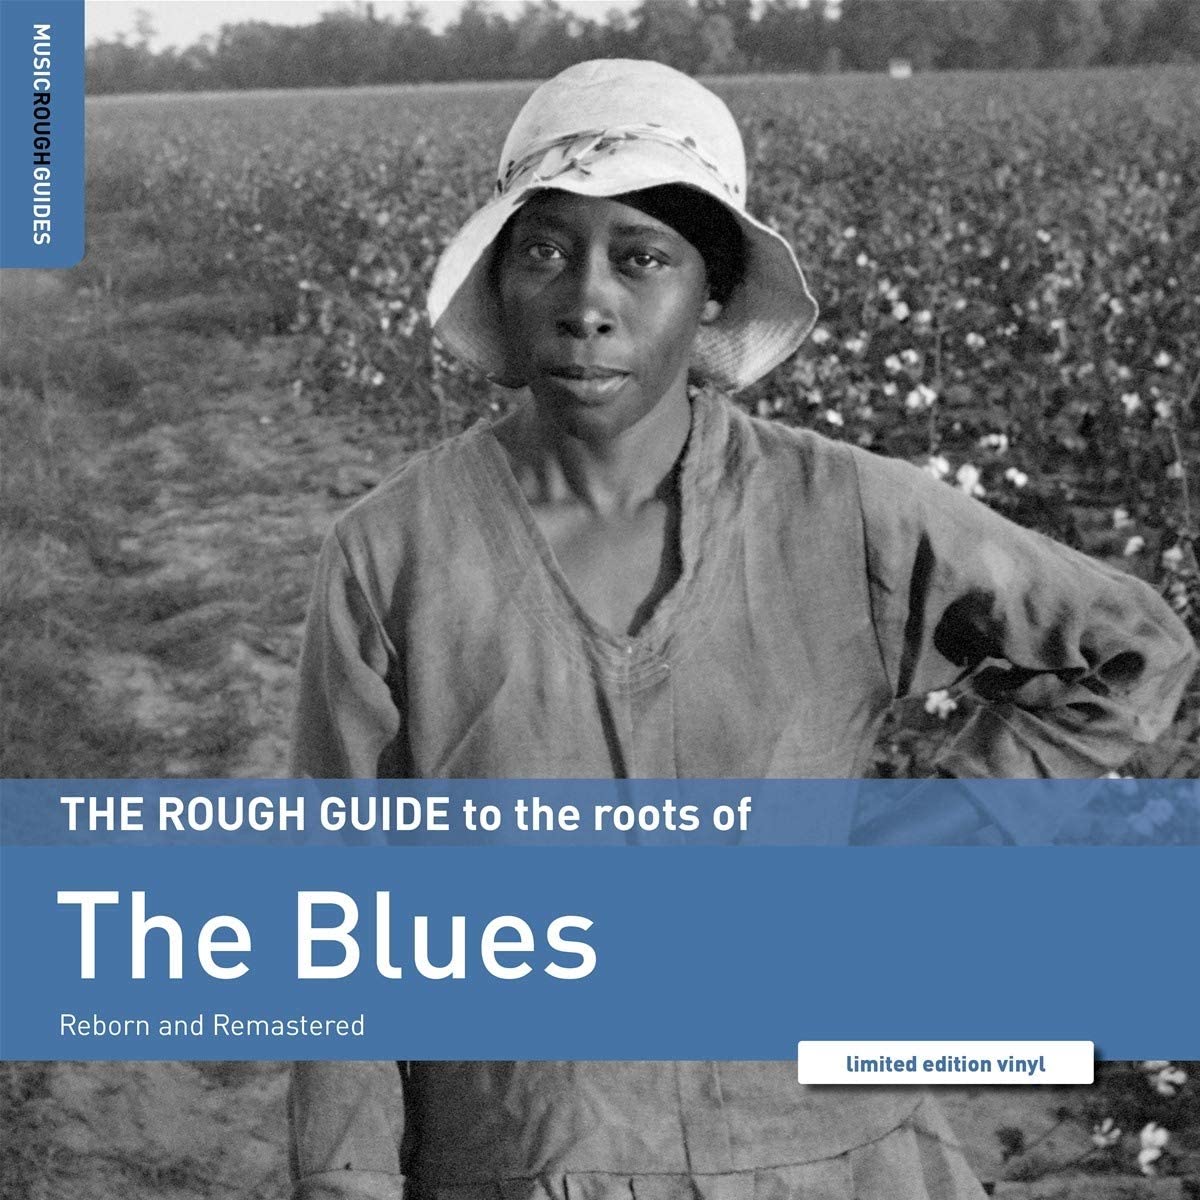 ROUGH GUIDE TO THE ROOTS OF THE BLUES [VINYL]